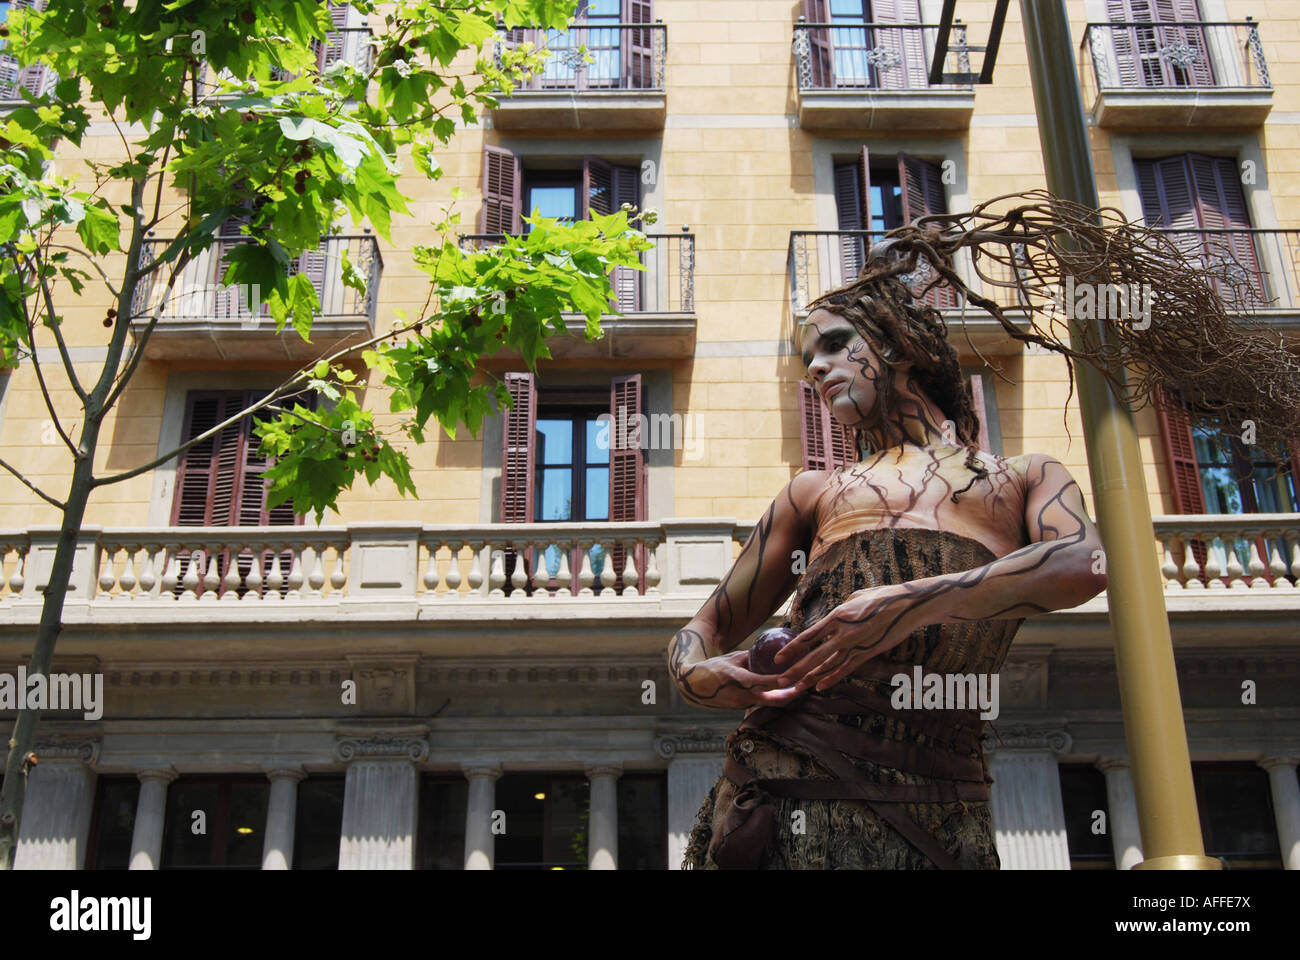 Mime artist performing her routine on Ramblas Barcelona Spain Stock Photo